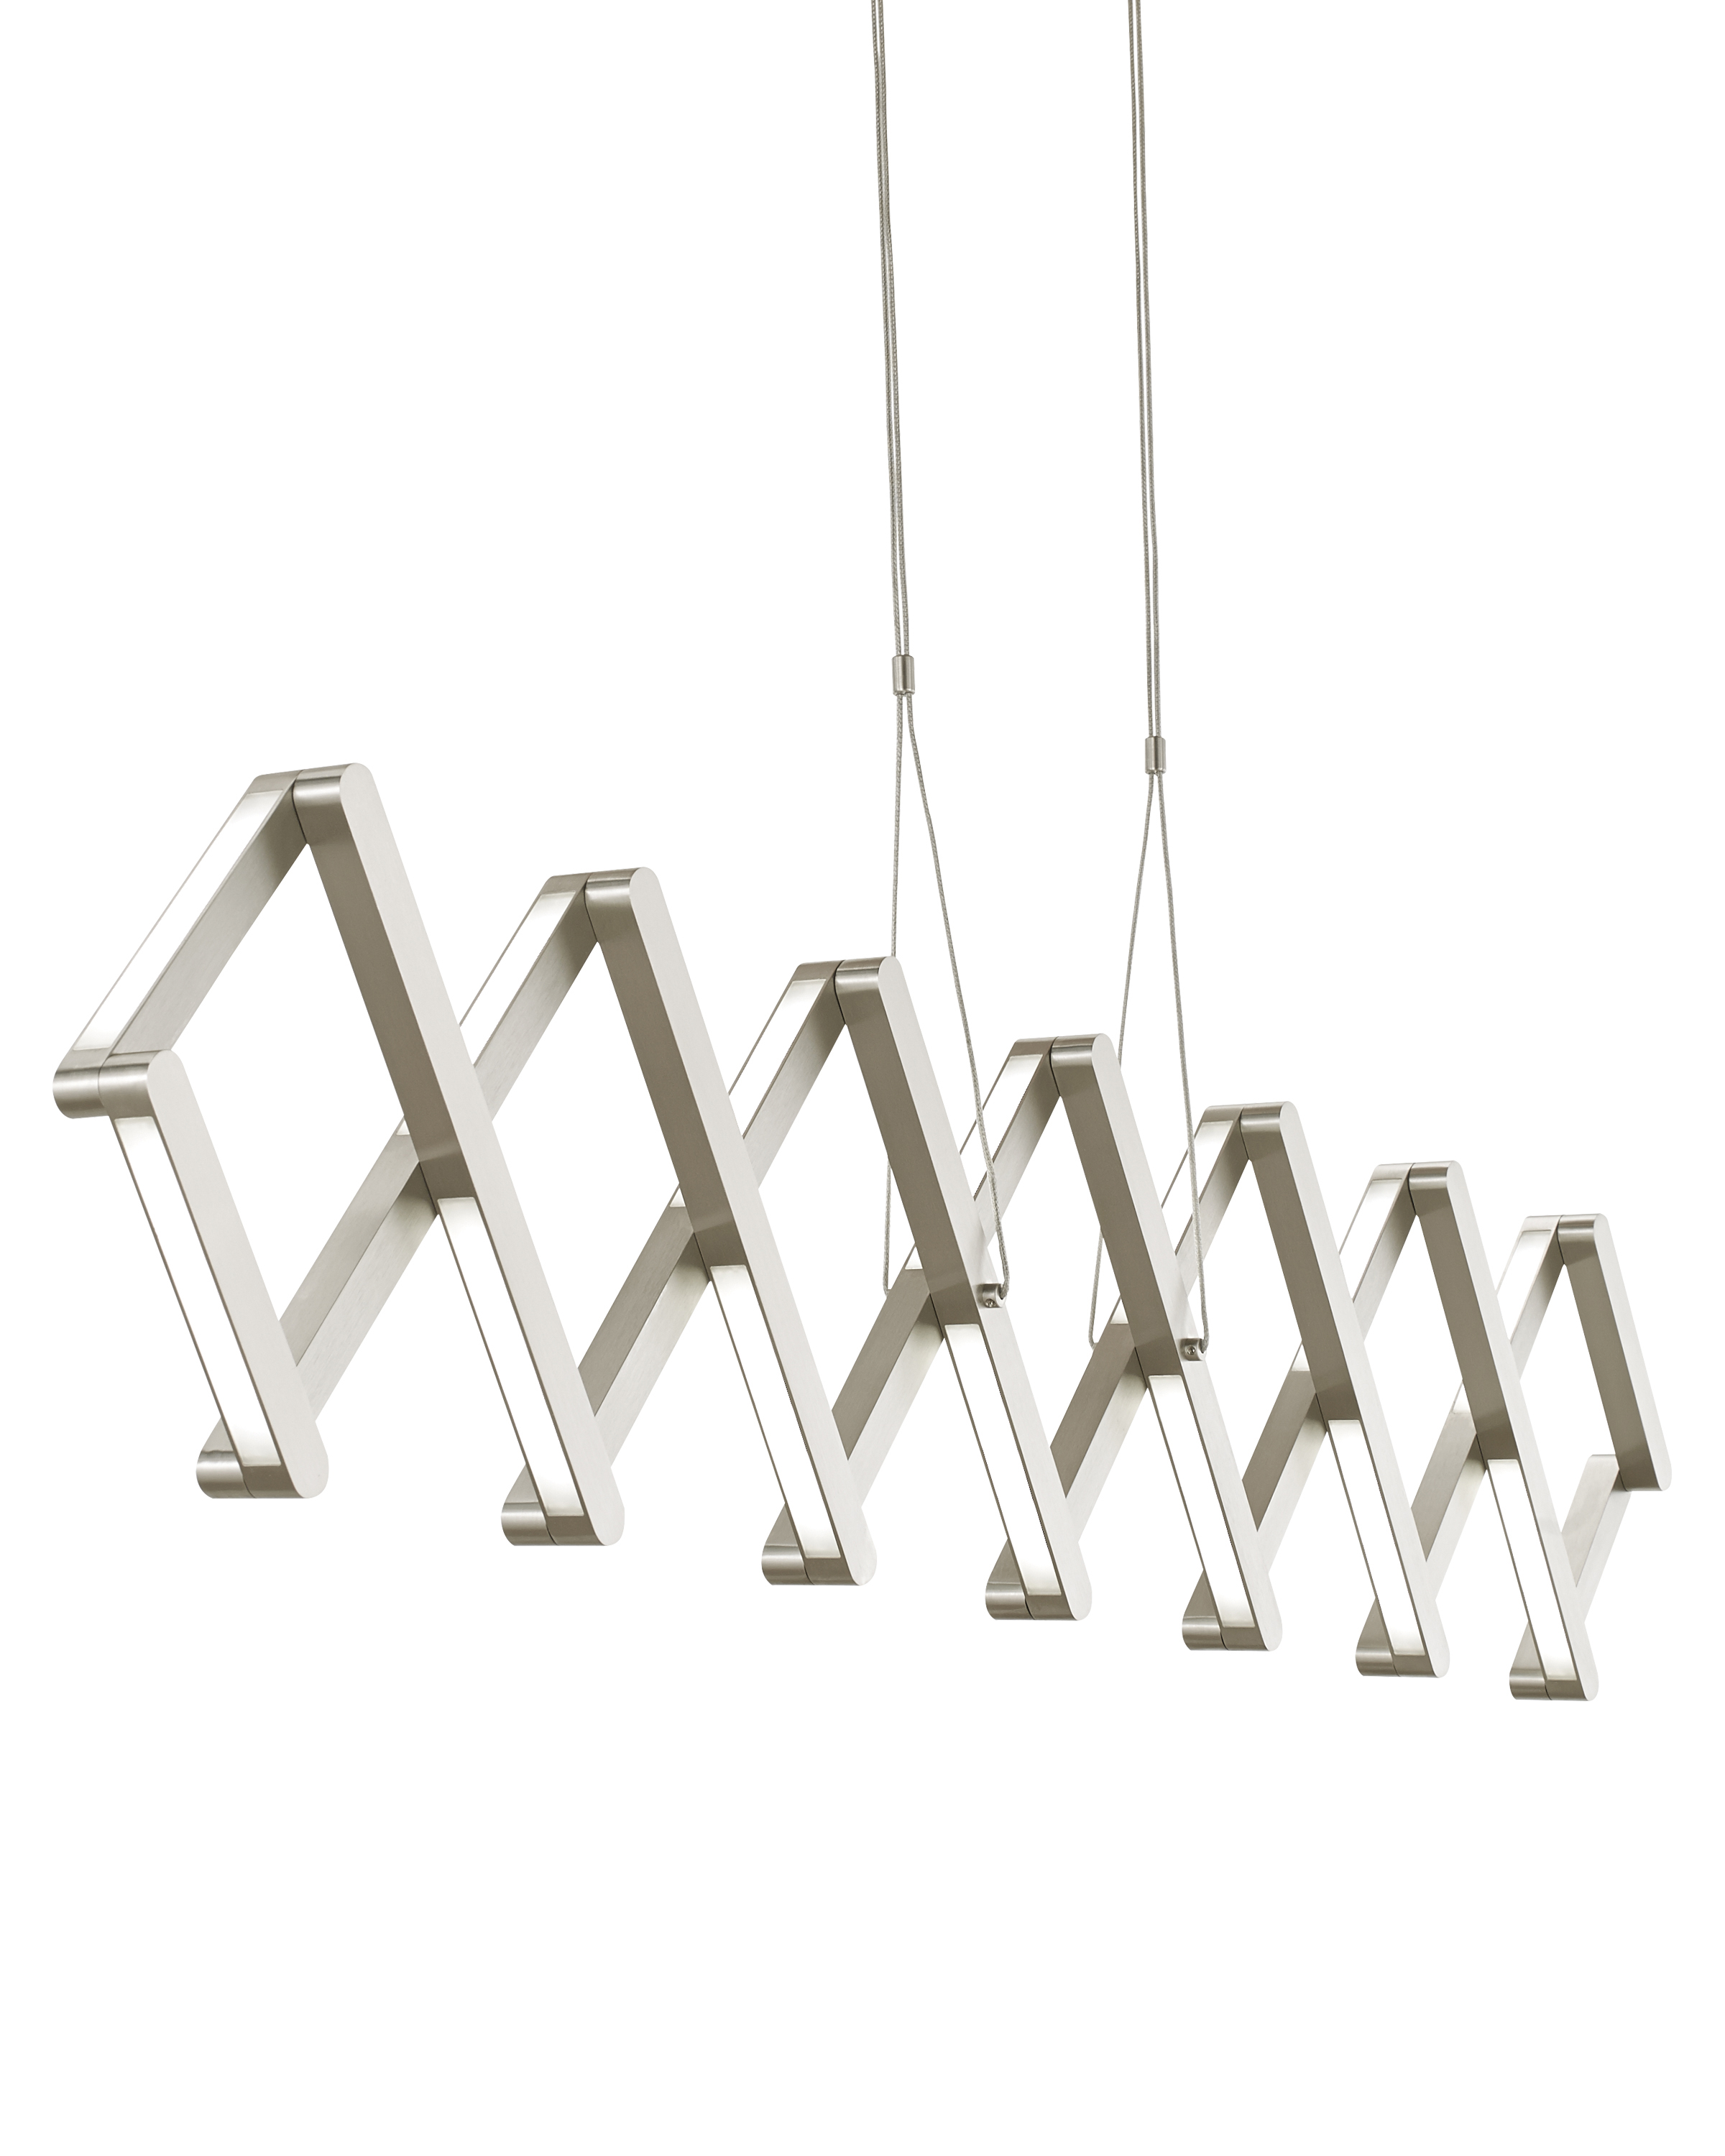 This Xterna linear suspension by LBL Lighting can be horizontally extended from 7" to 76" even after installation.